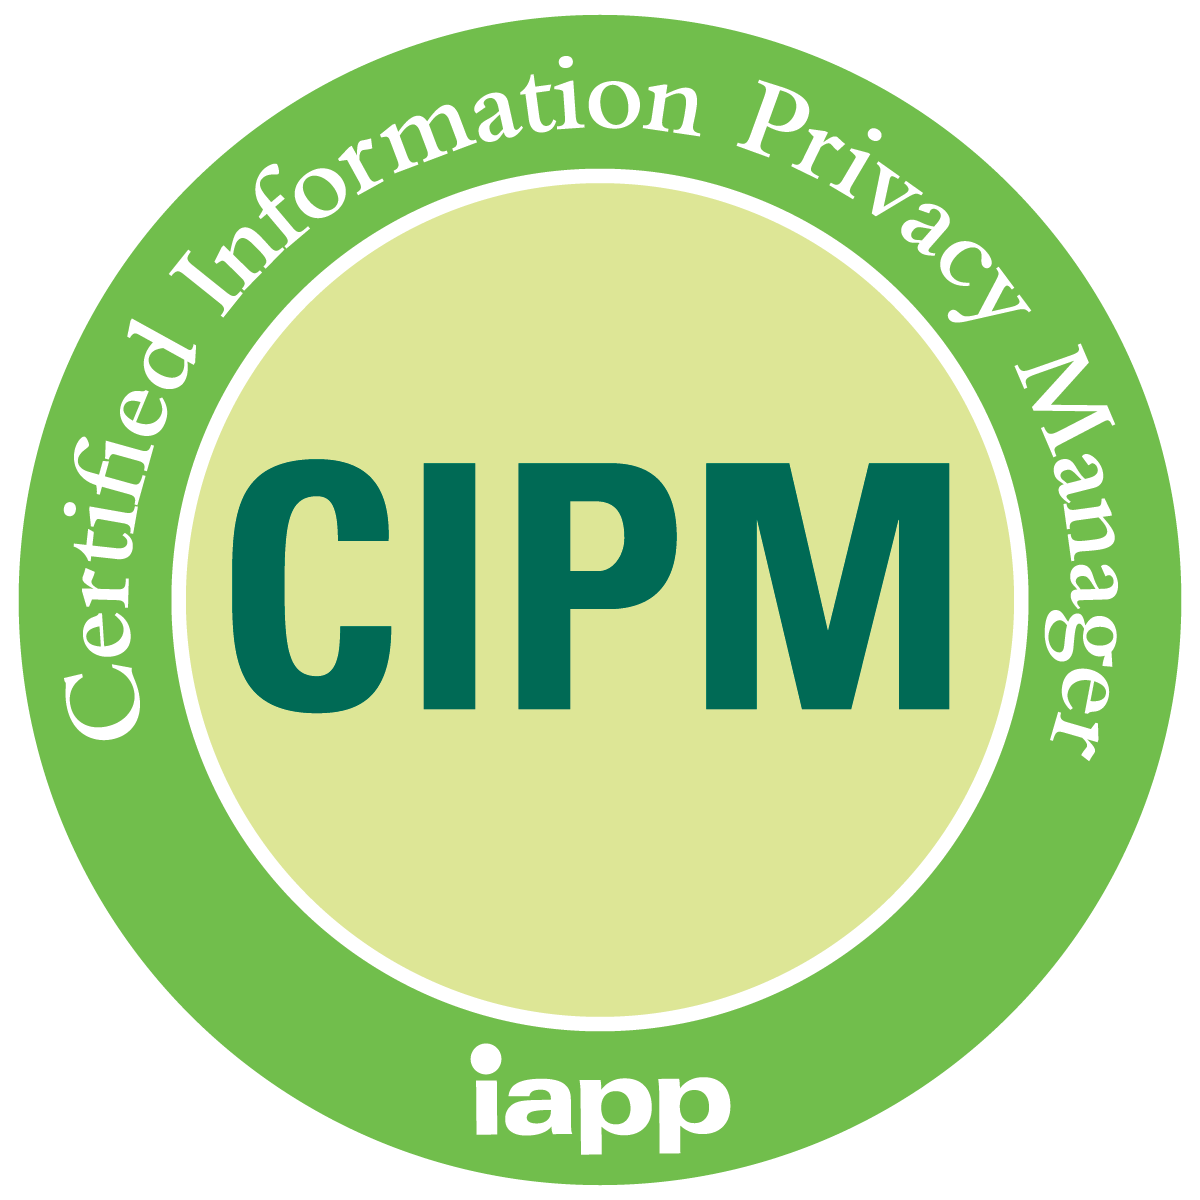 Certified Information Privacy Manager (CIPM) (Thai)